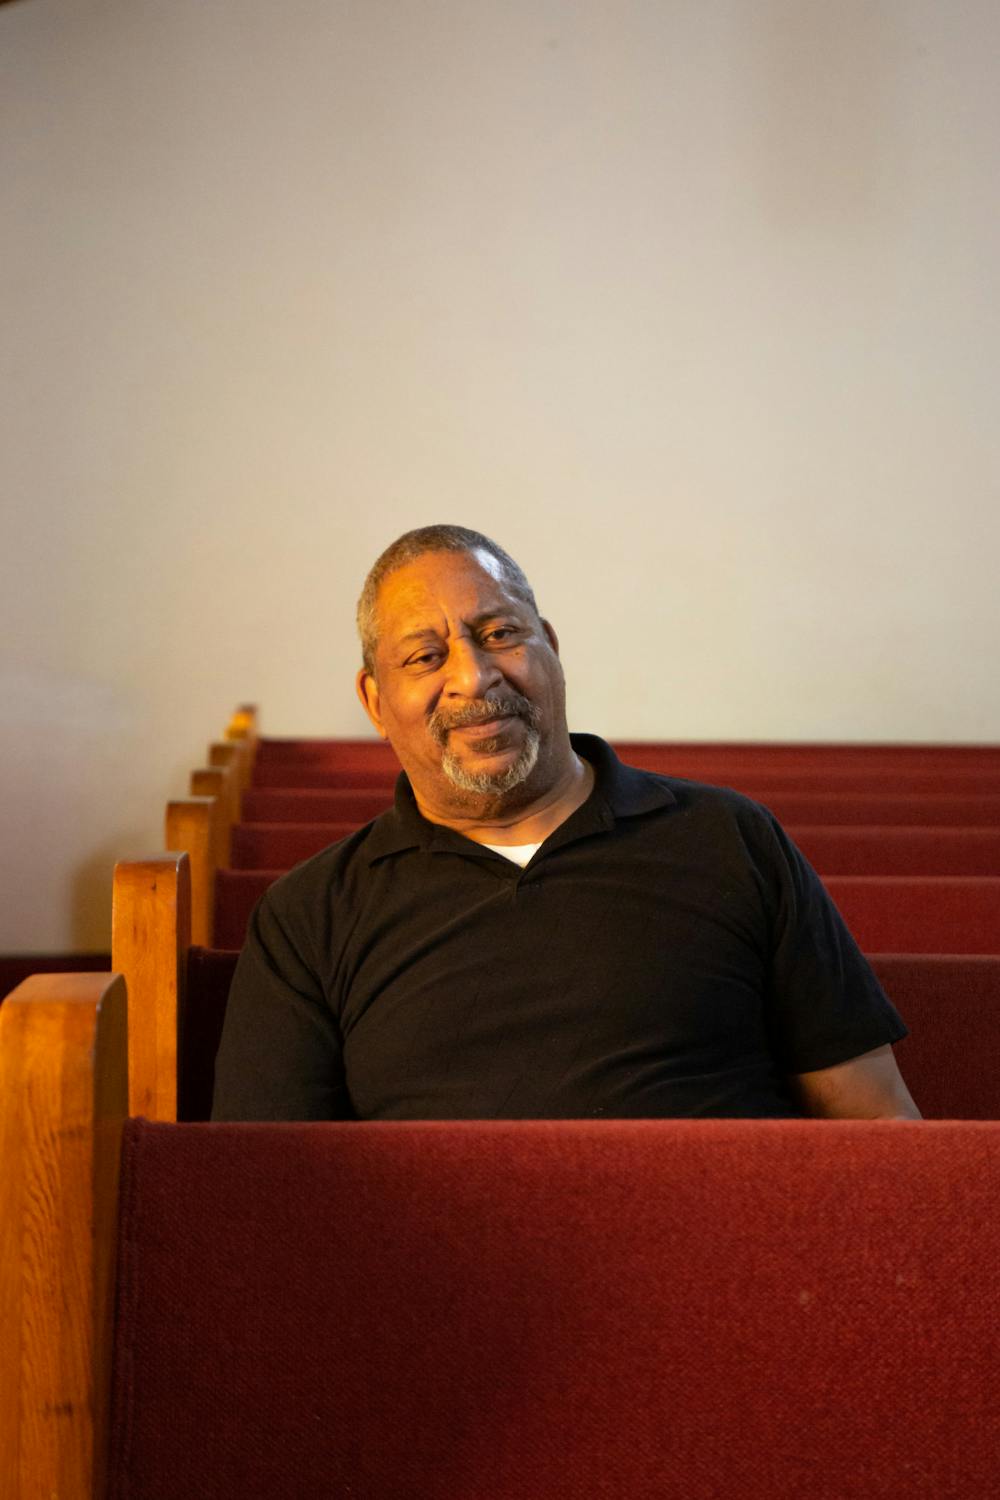 Founded in a house in 1868, Muncie’s Bethel AME Church is Delaware County’s oldest Black church